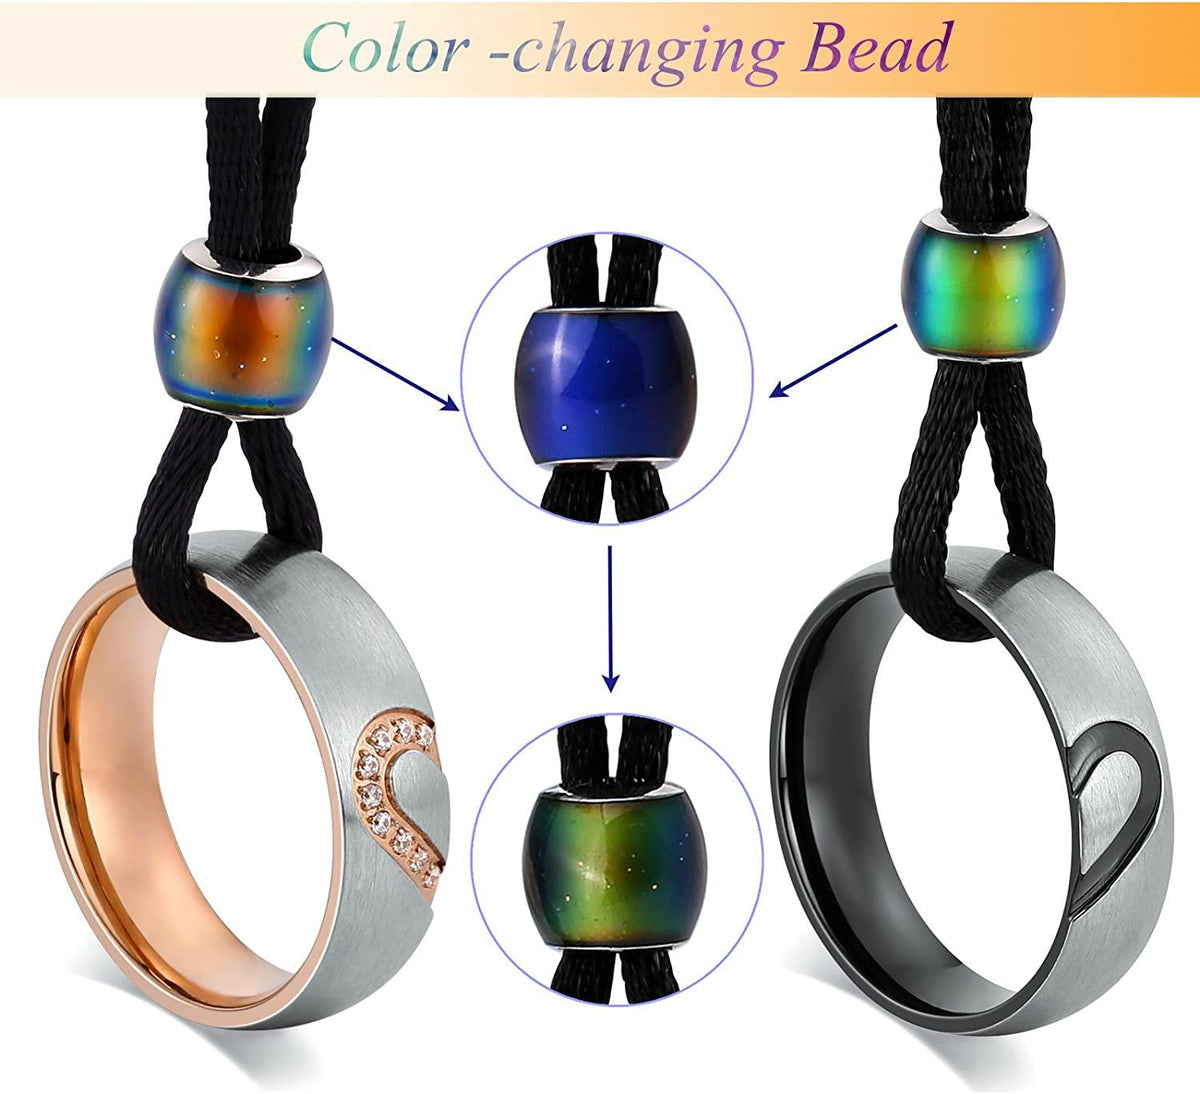 C&amp;L Mood Ring Necklaces - Circle and Luck Company